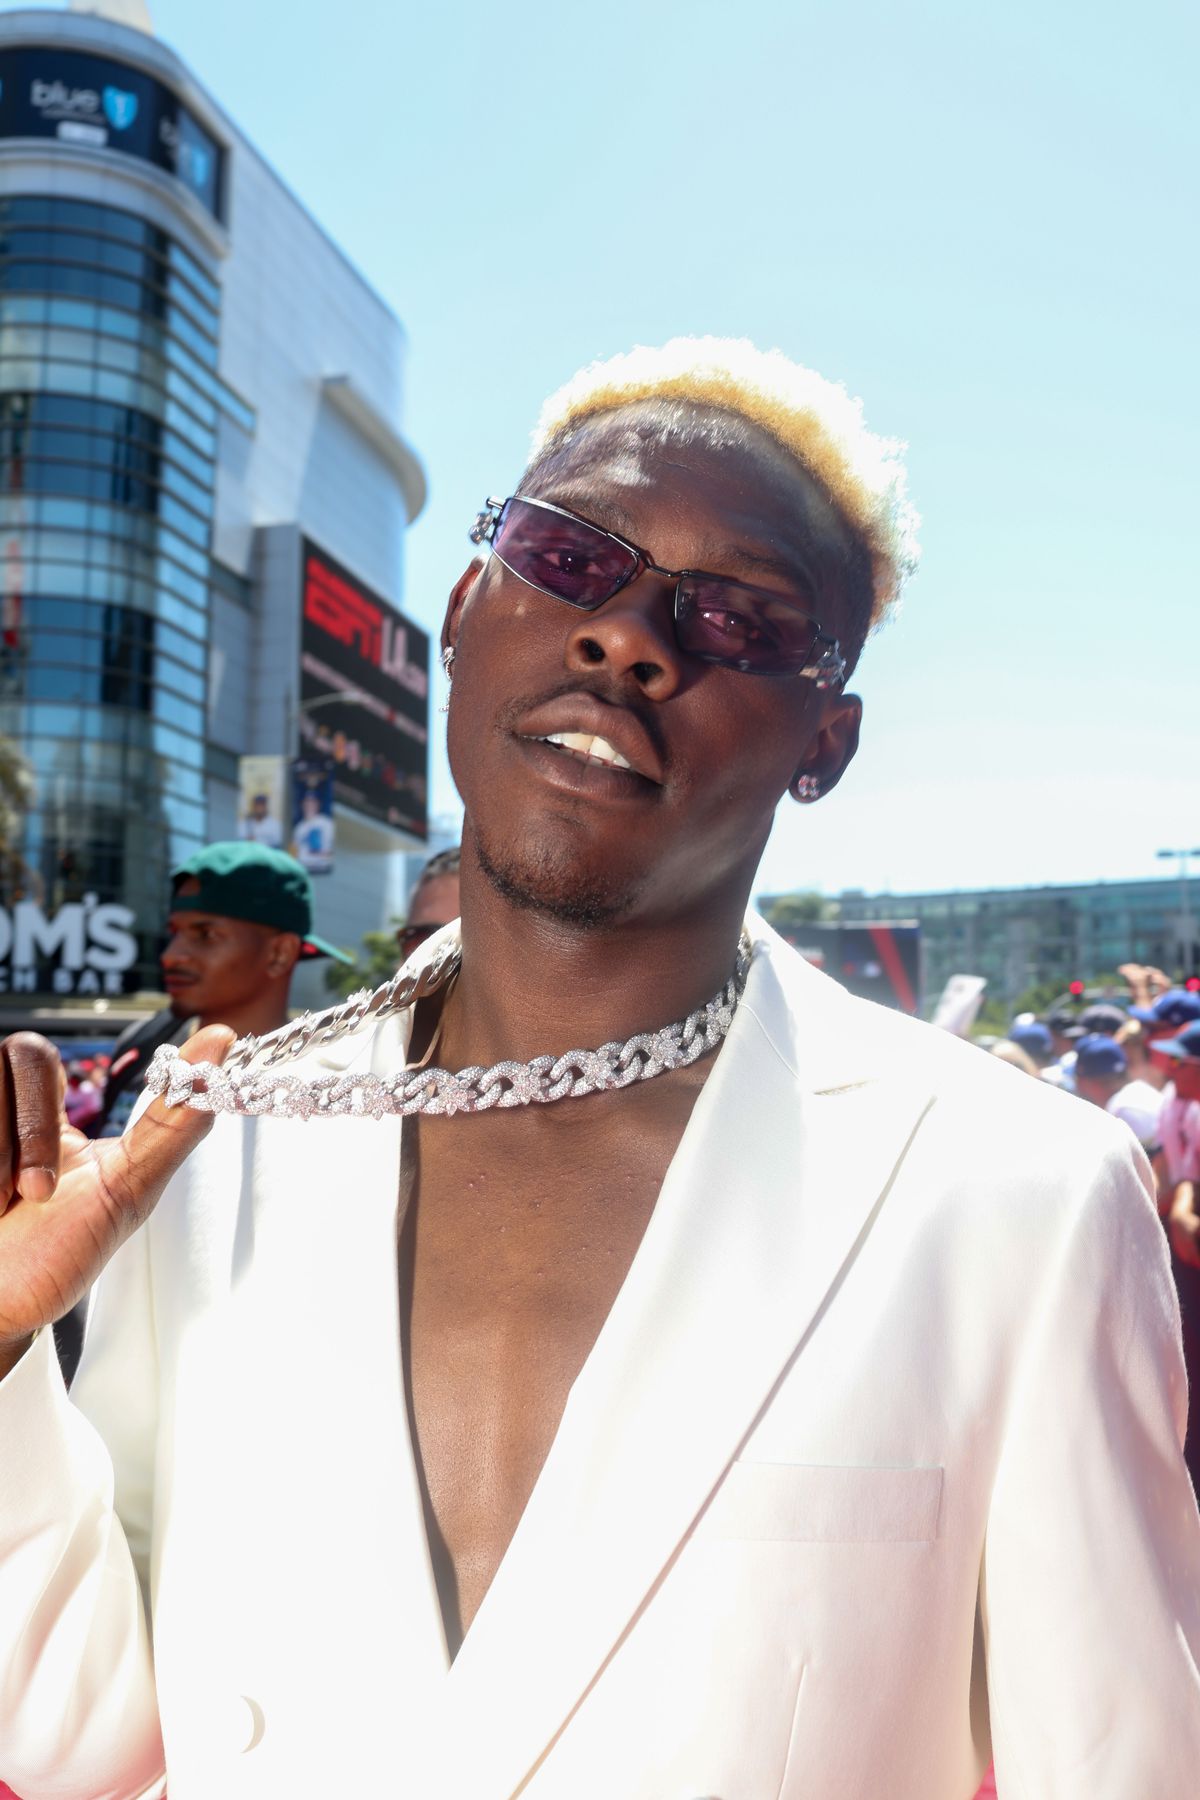 Jazz Chisholm Jr. #2 of the Miami Marlins poses for a photo during the All-Star Red Carpet Show at L.A. Live on Tuesday, July 19, 2022 in Los Angeles, California.